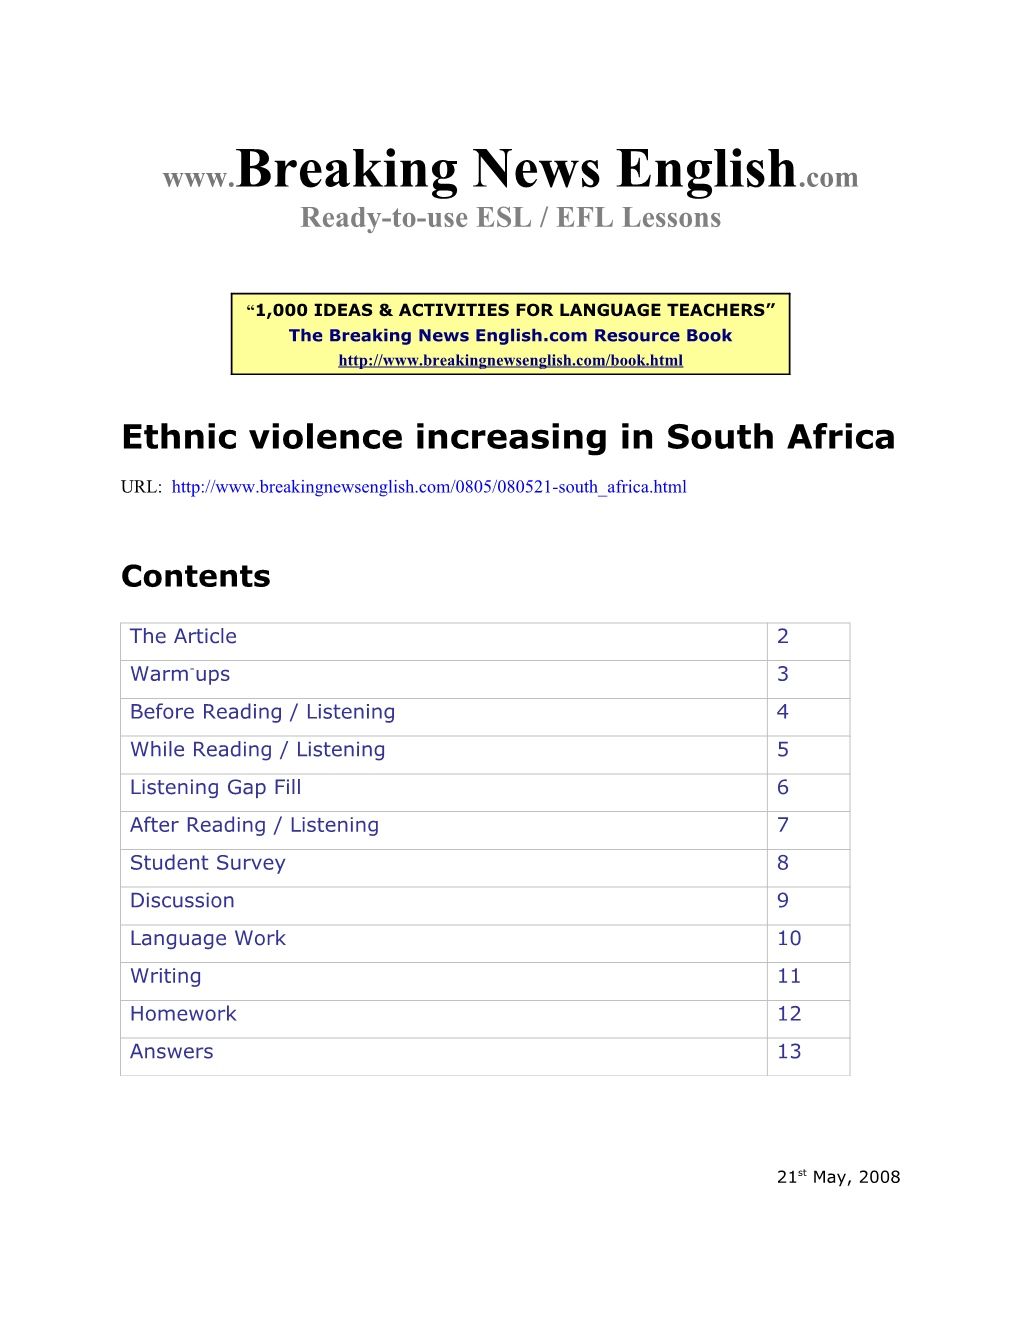 Ethnic Violence Increasing in South Africa